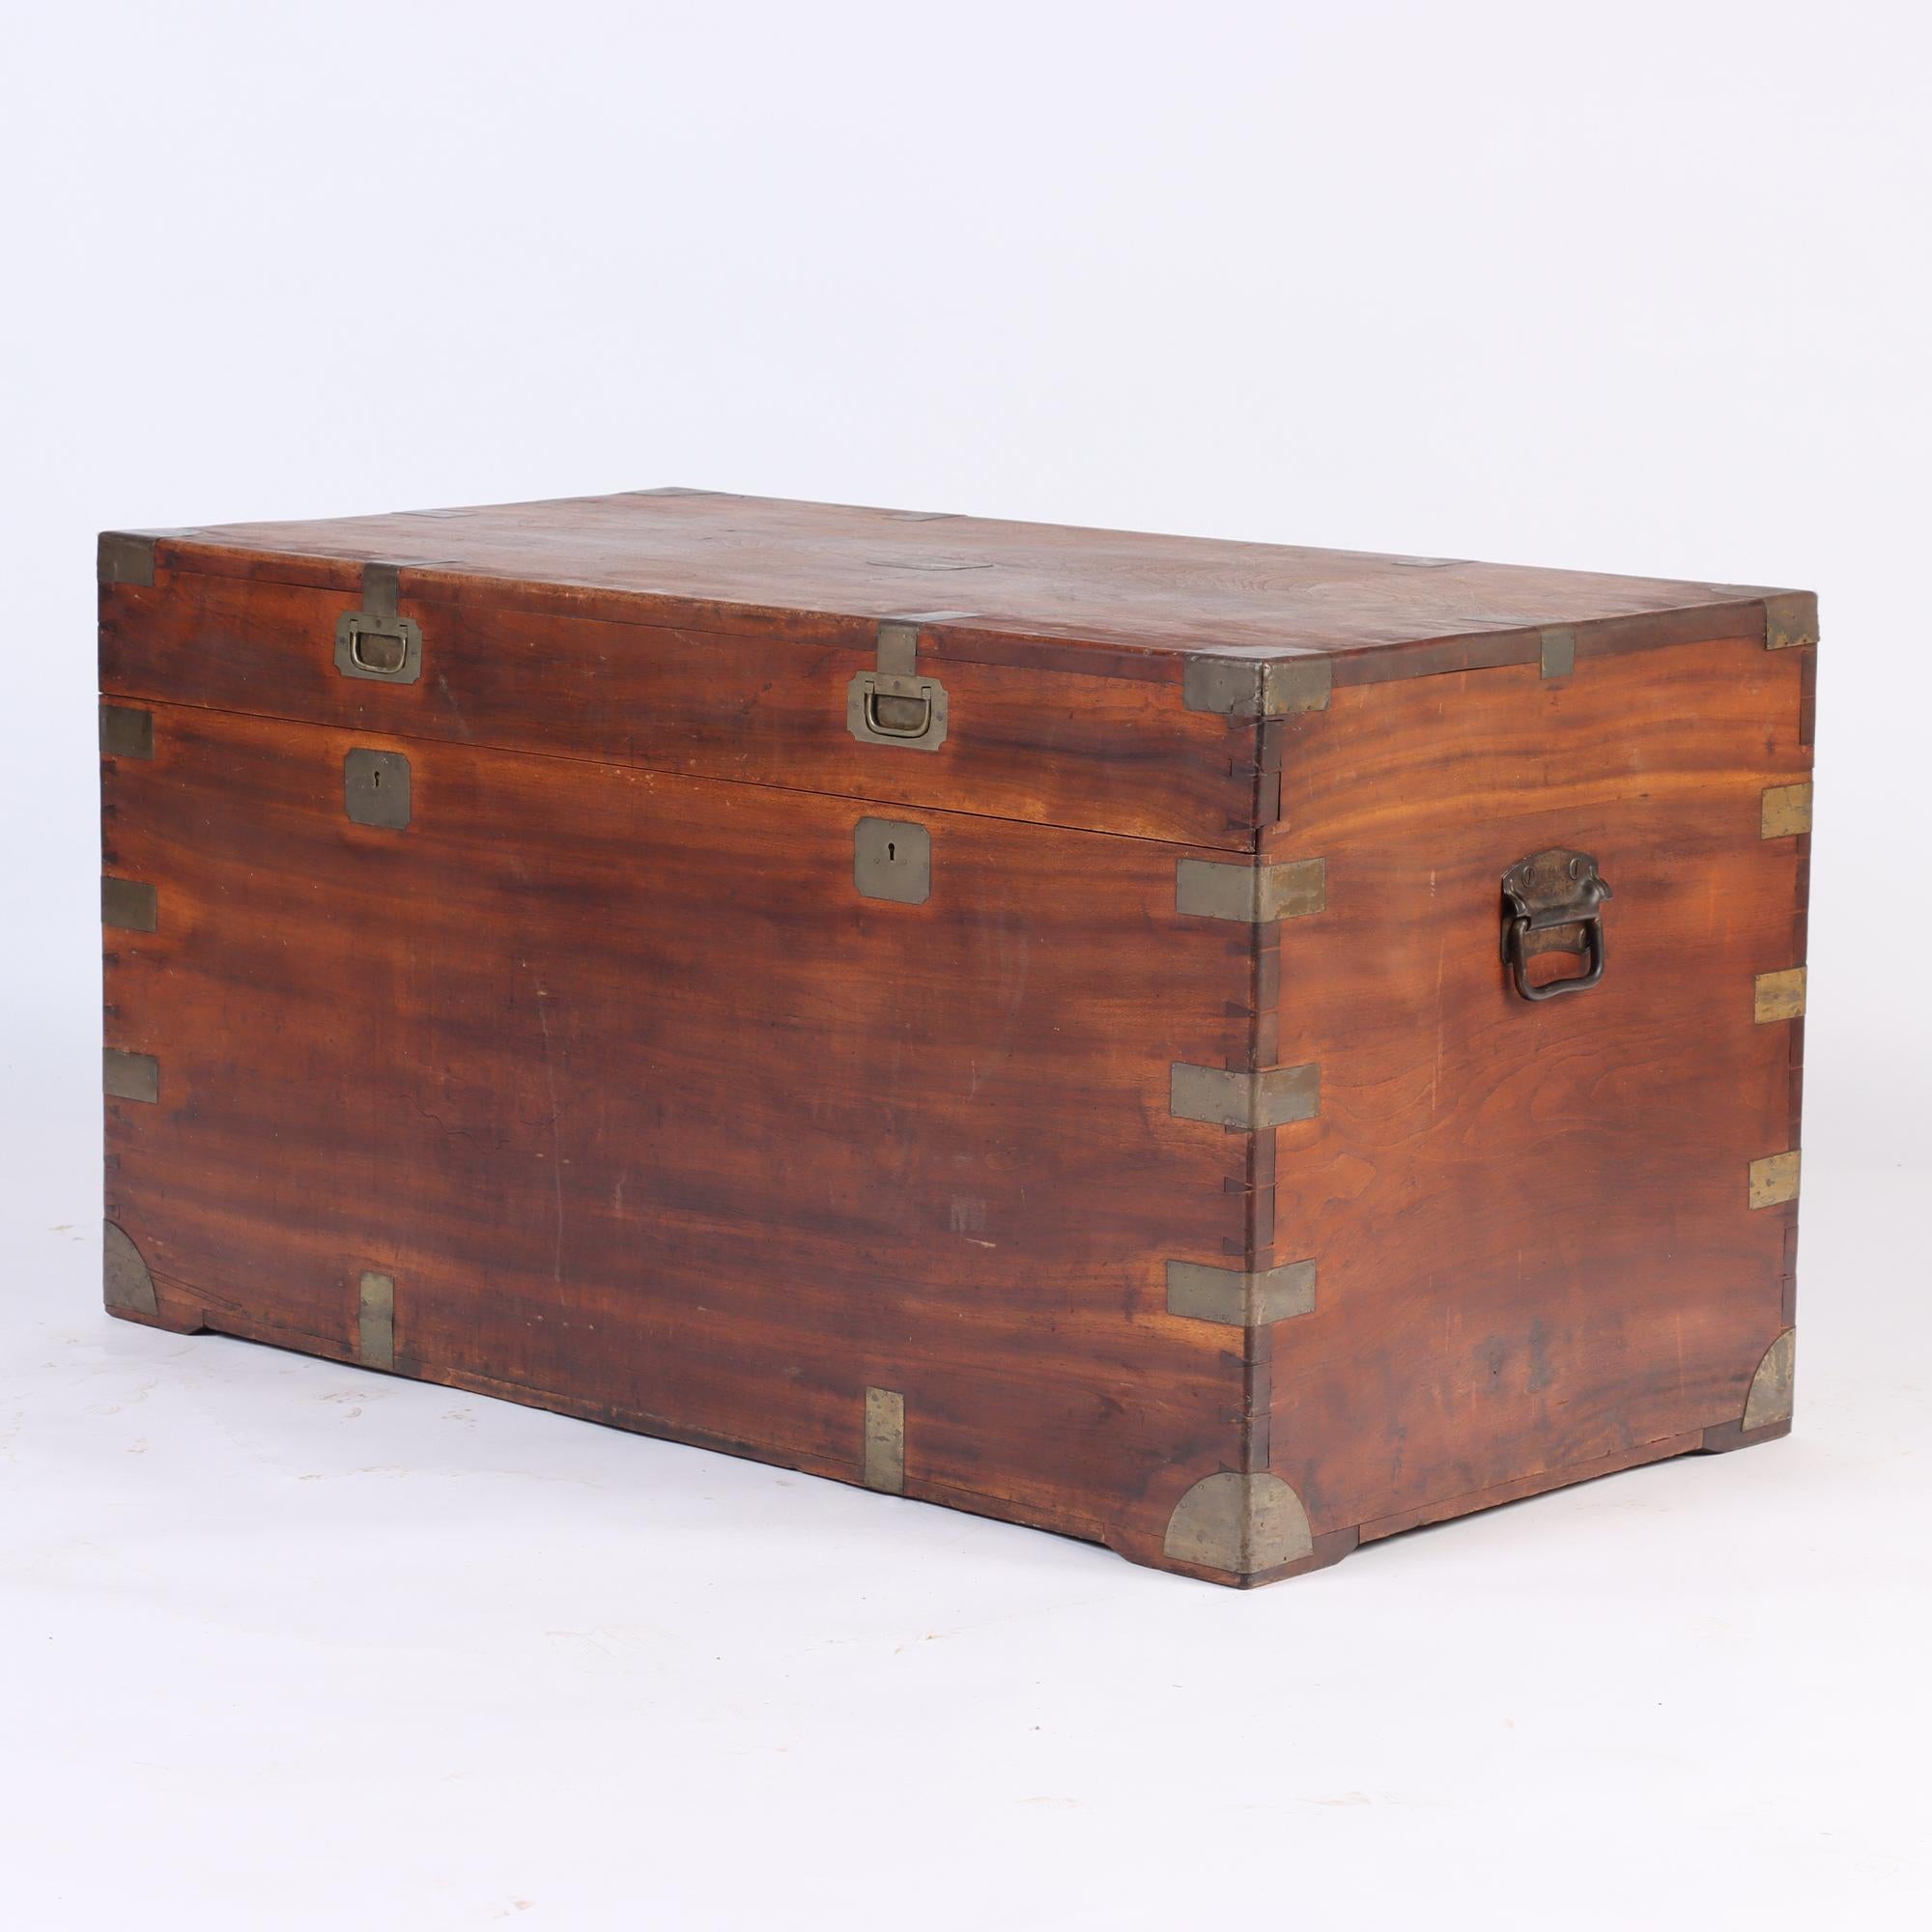 English Large Marine Chest / Campaign Chest in Camphor Wood from the 19th Century For Sale